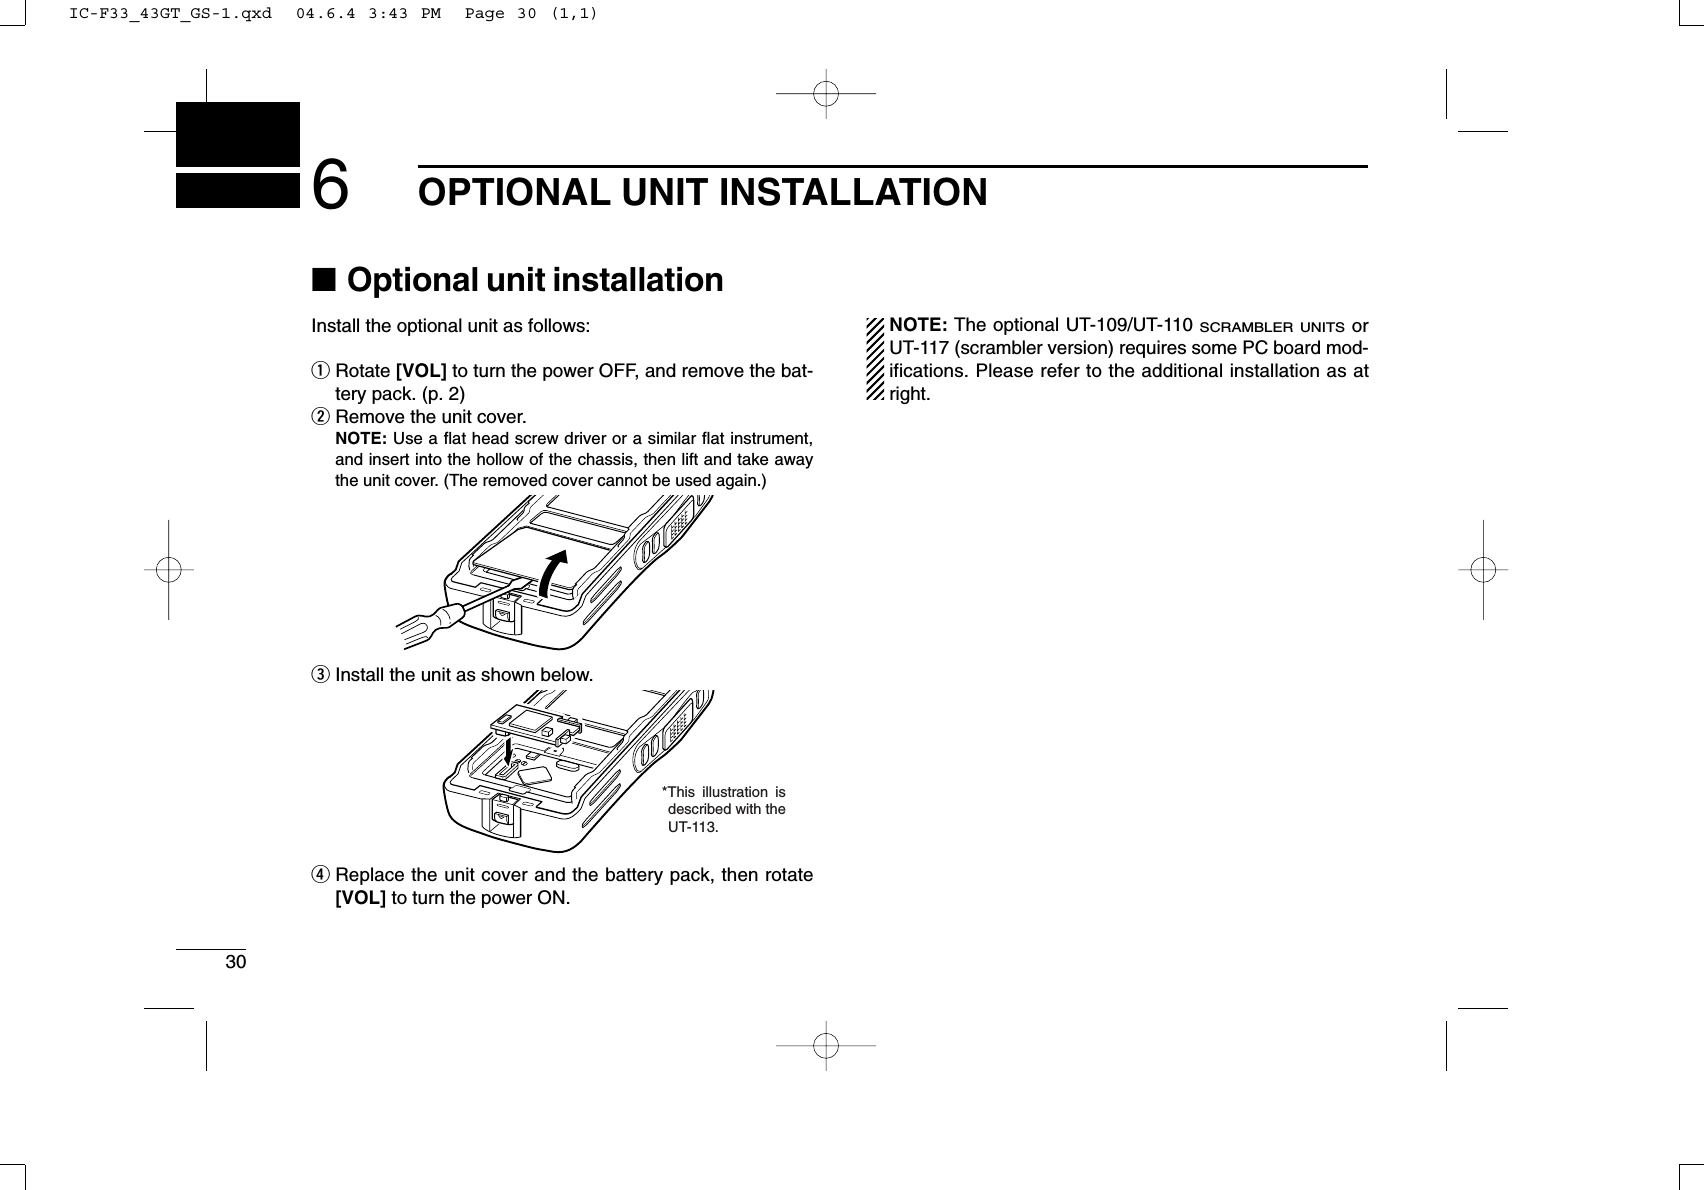 306OPTIONAL UNIT INSTALLATION■Optional unit installationInstall the optional unit as follows:qRotate [VOL] to turn the power OFF, and remove the bat-tery pack. (p. 2)wRemove the unit cover.NOTE: Use a ﬂat head screw driver or a similar ﬂat instrument,and insert into the hollow of the chassis, then lift and take awaythe unit cover. (The removed cover cannot be used again.)eInstall the unit as shown below.rReplace the unit cover and the battery pack, then rotate[VOL] to turn the power ON.NOTE: The optional UT-109/UT-110 SCRAMBLER UNITSorUT-117 (scrambler version) requires some PC board mod-ifications. Please refer to the additional installation as atright.*This illustration is described with the UT-113.IC-F33_43GT_GS-1.qxd  04.6.4 3:43 PM  Page 30 (1,1)